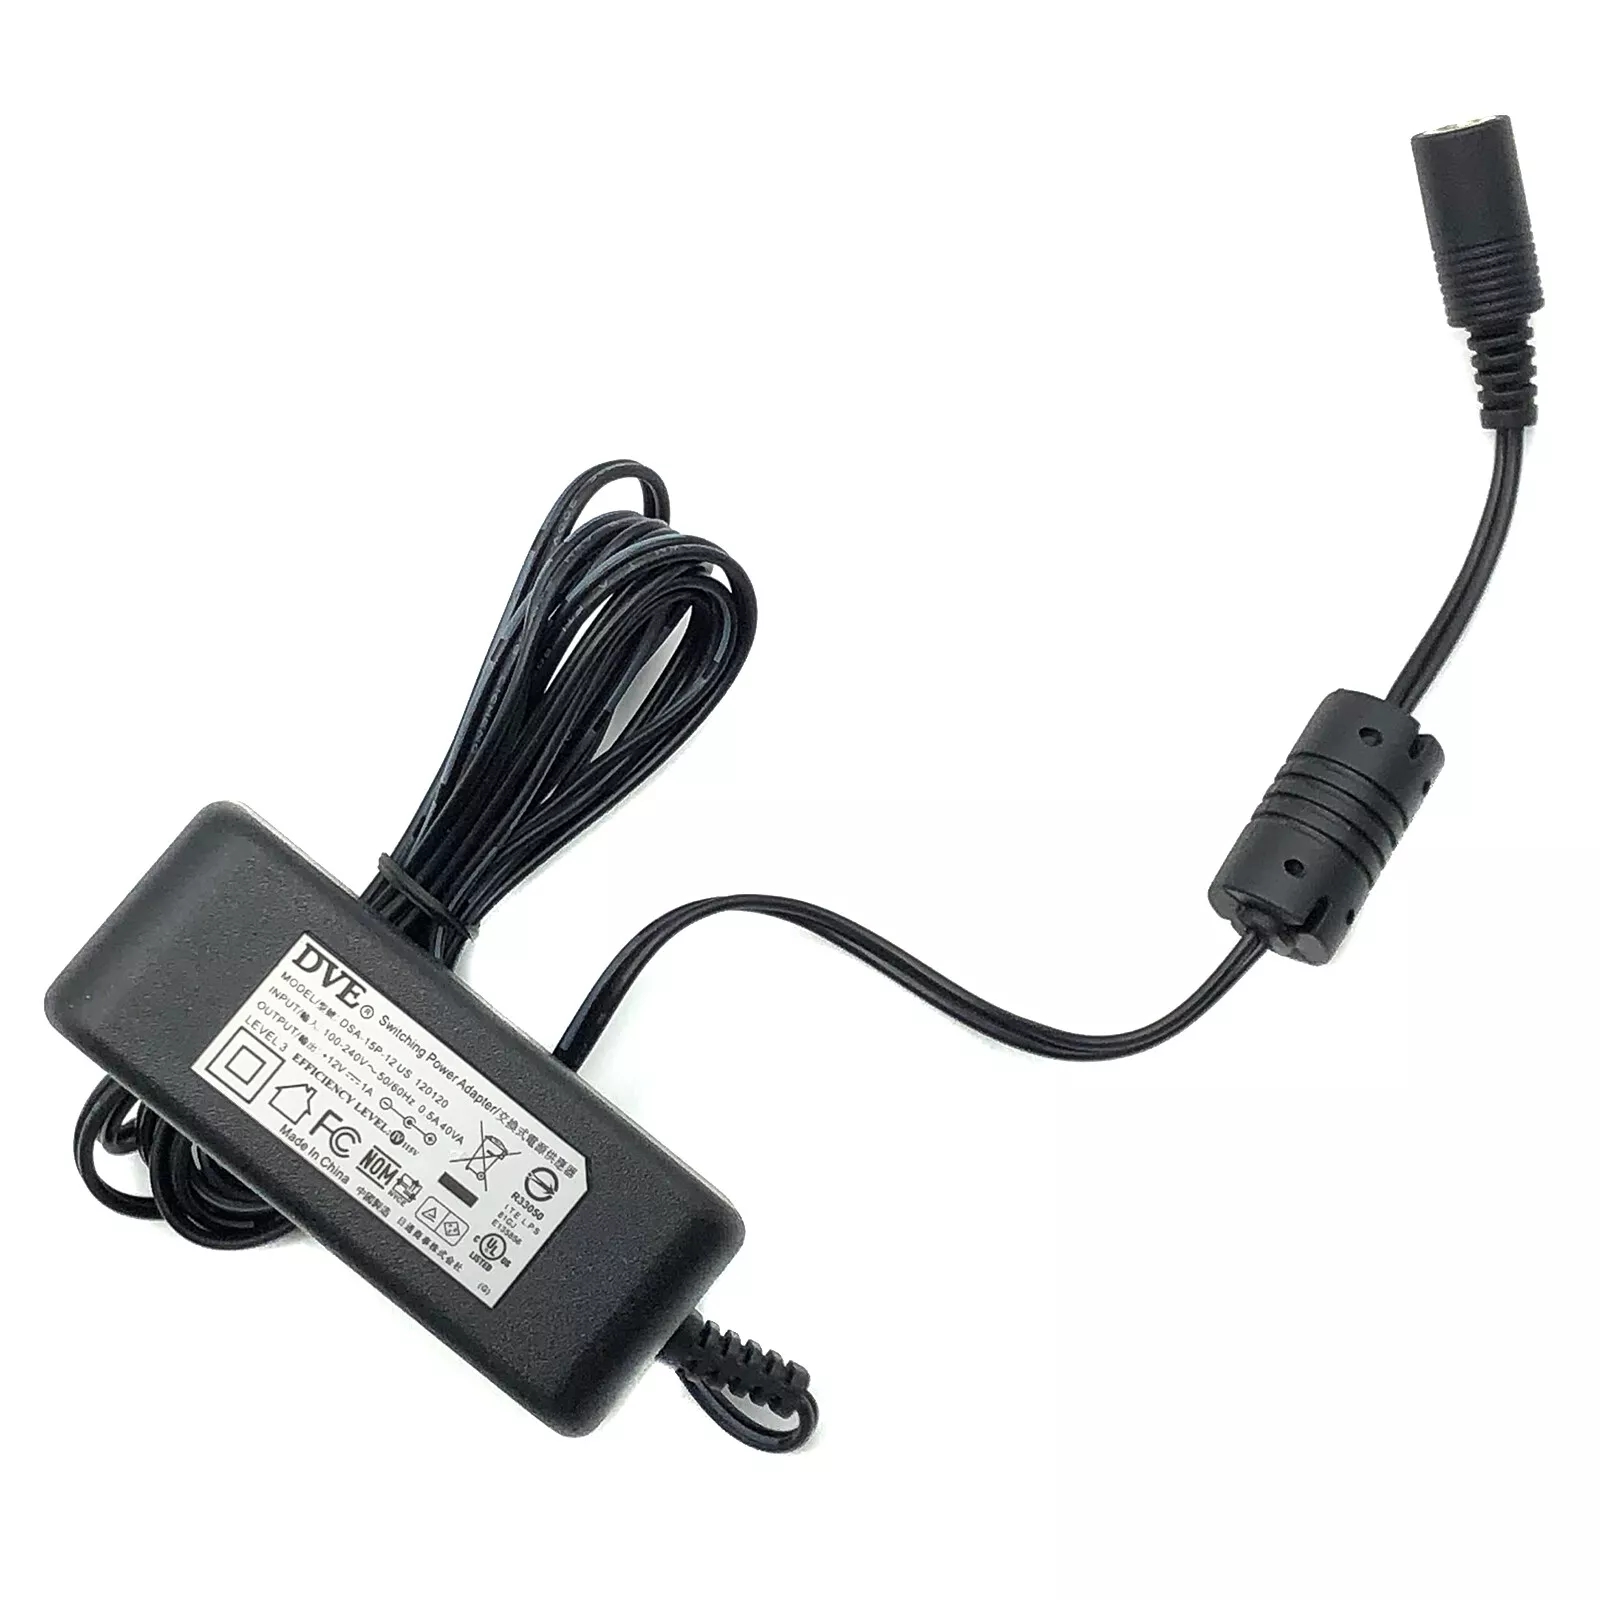 *Brand NEW*Genuine +12V 1A 12W DVE Switching Power Adapter Model DSA-15P-12 US 120120 Power Supply